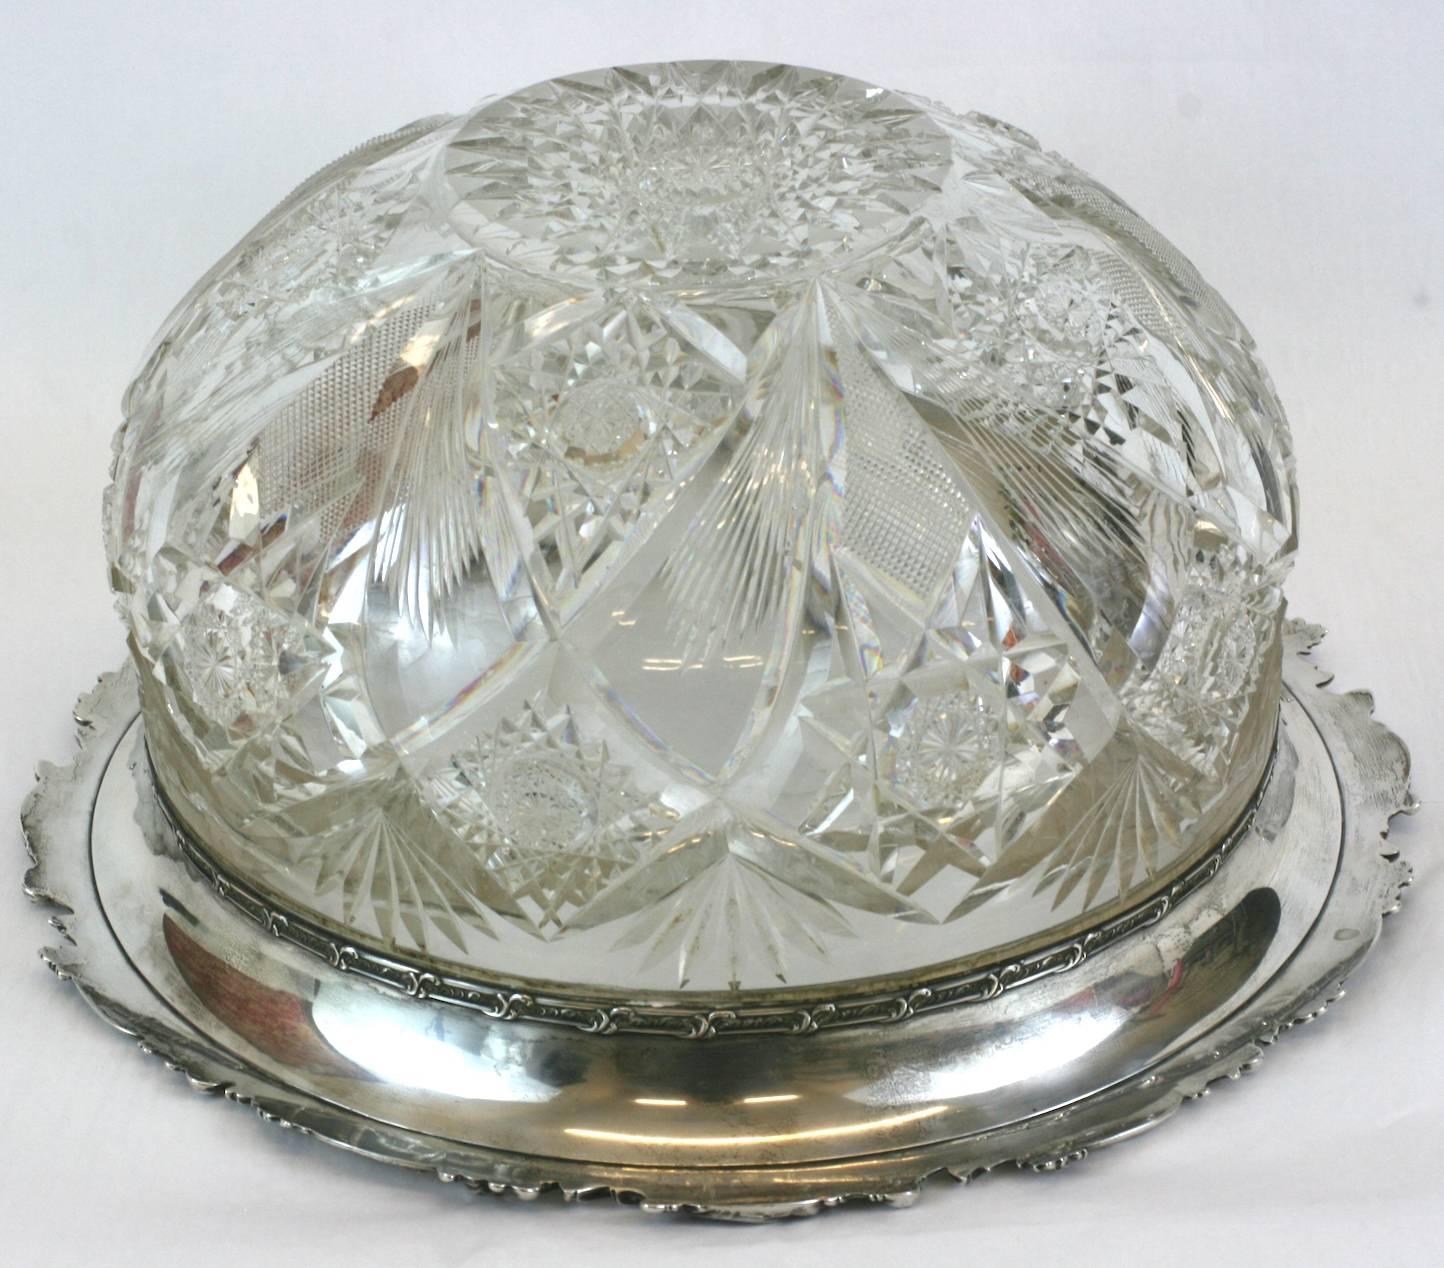 Large crystal punch bowl with large repousse sterling lip. Brilliant cut crystal by Hawkes in star motifs (Holland pattern) encircle the bowl. Floral trimmed sterling lip along edge. Extremely, extremely heavy quality piece (approximate 20 lbs). Has